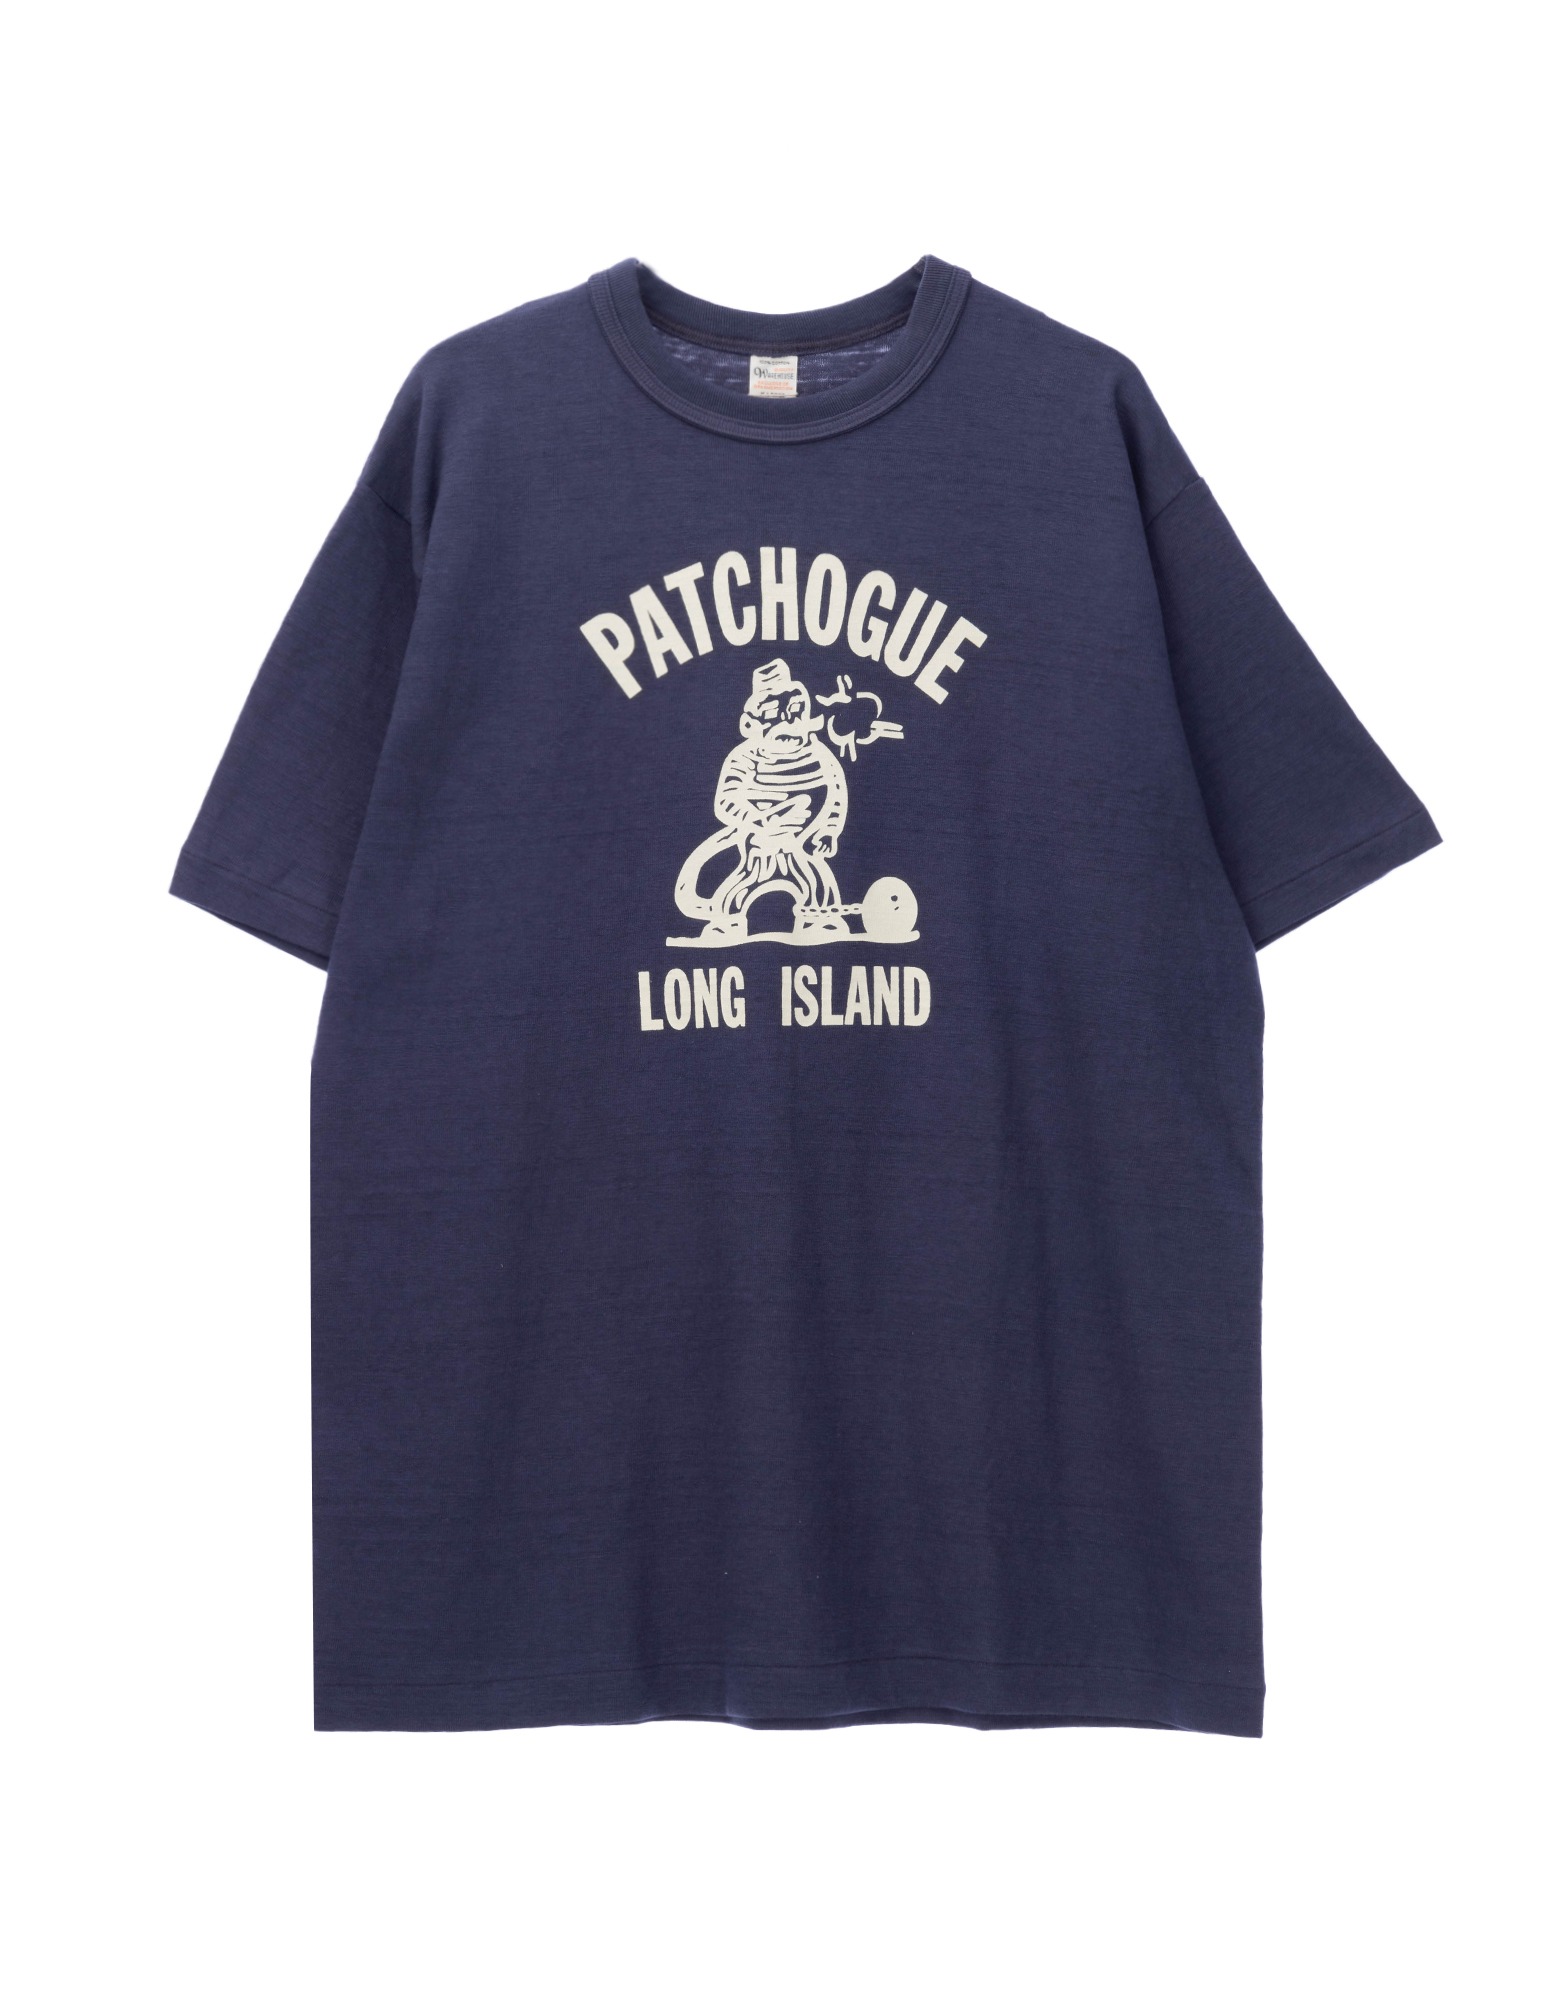 Lot 4601, PATCHOGUE (Navy)